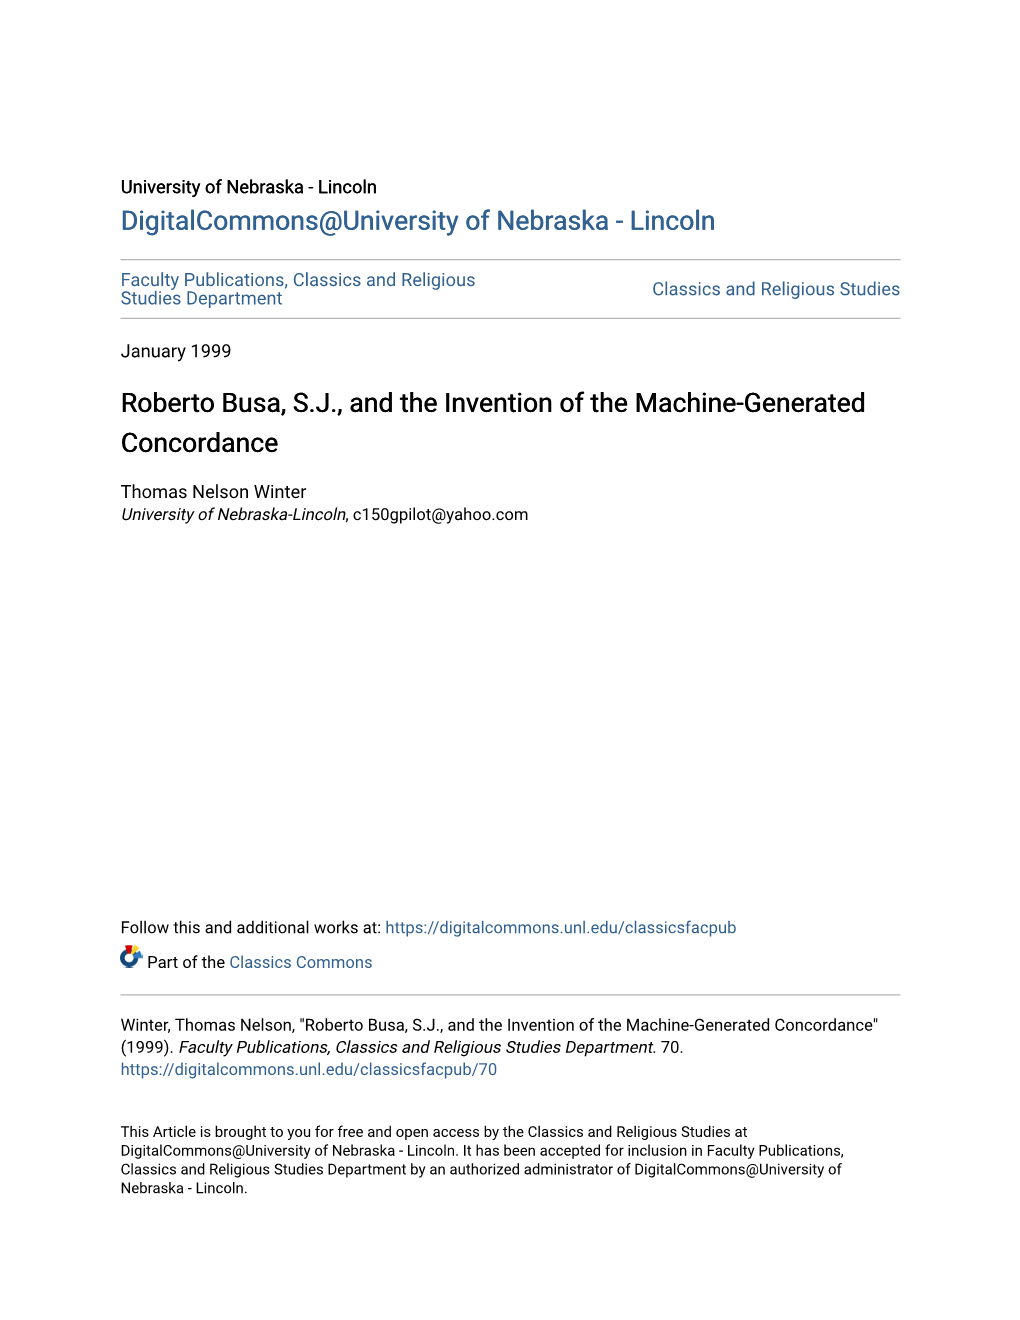 Roberto Busa, S.J., and the Invention of the Machine-Generated Concordance